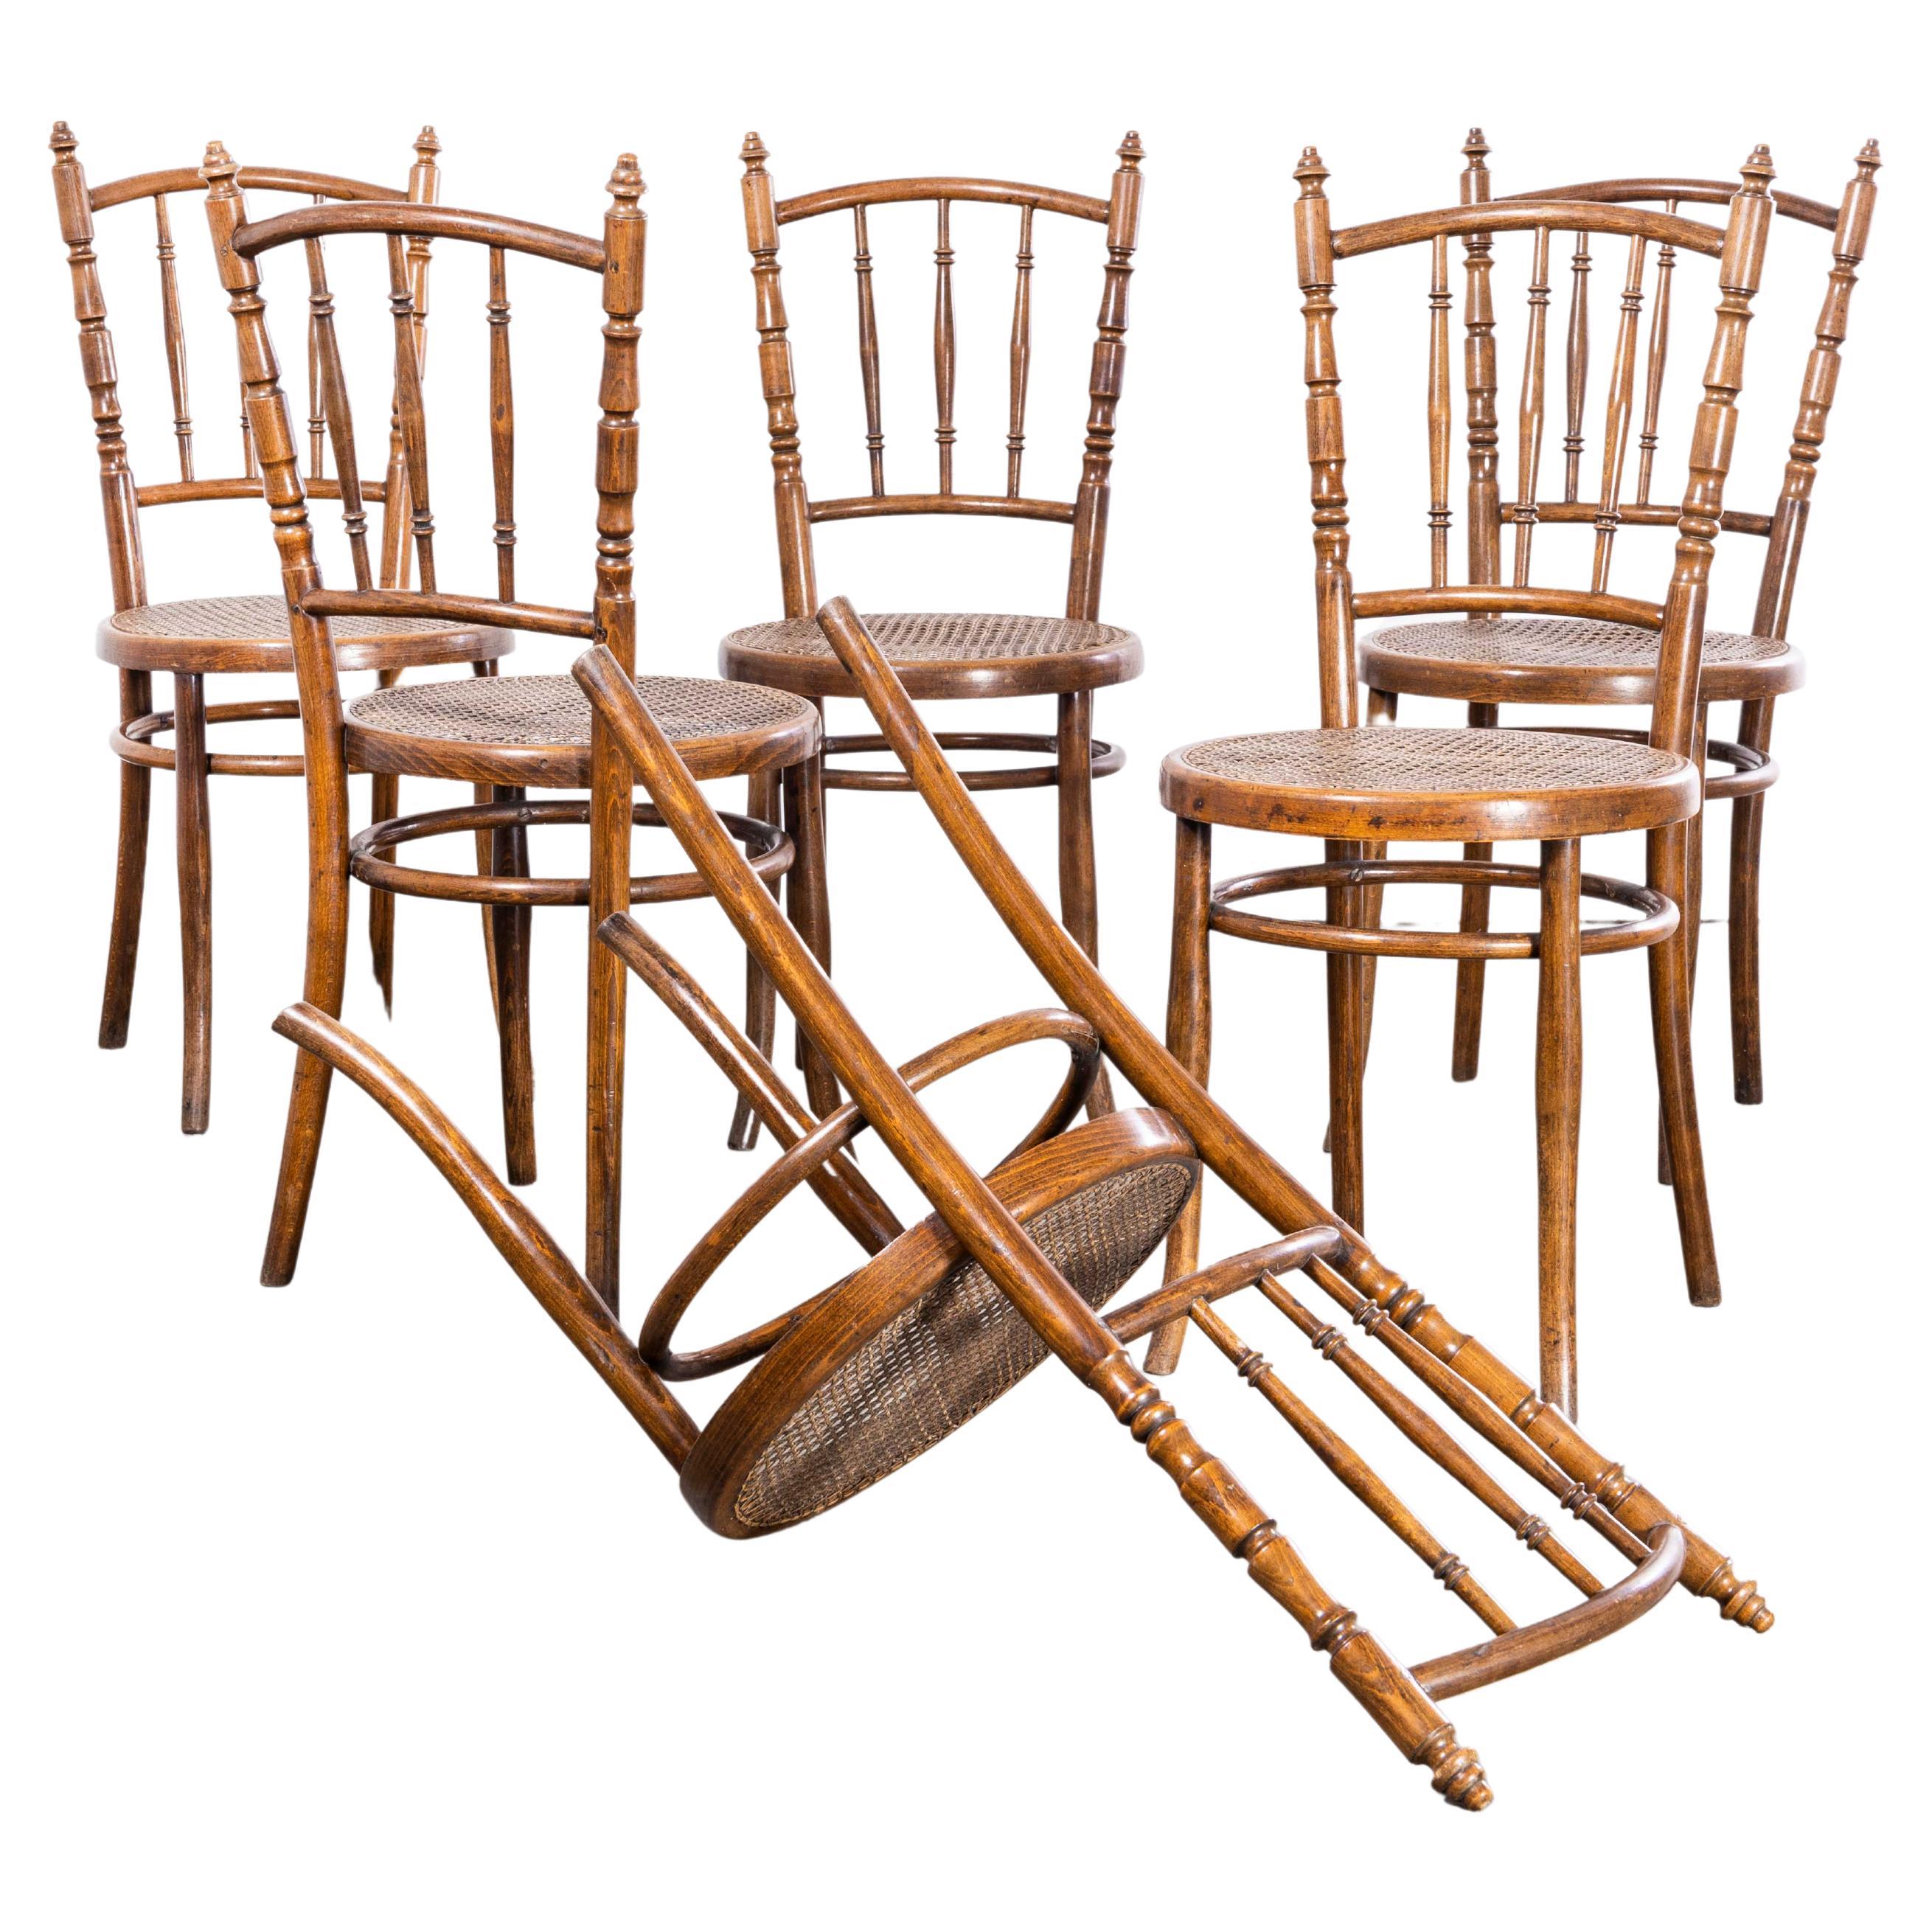 1950s Cane Seated Hofmann Bentwood Dining Chairs – Set Of Six.